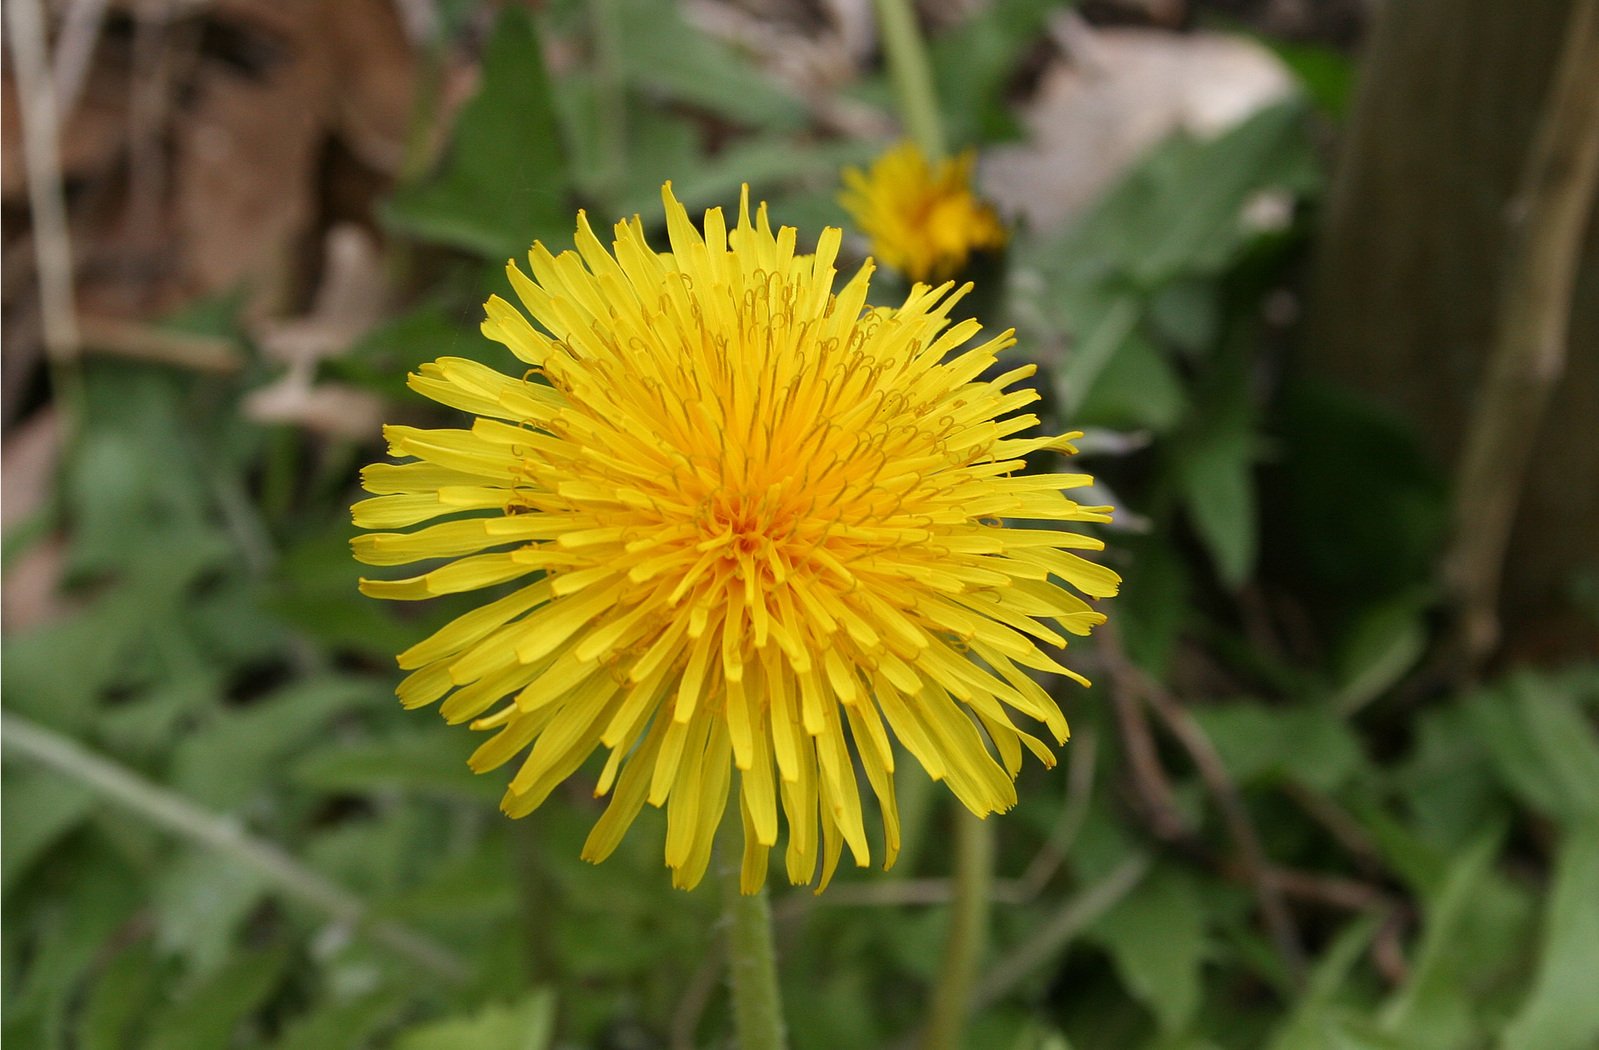 yellow flower with green leaf in background and leaves surrounding it